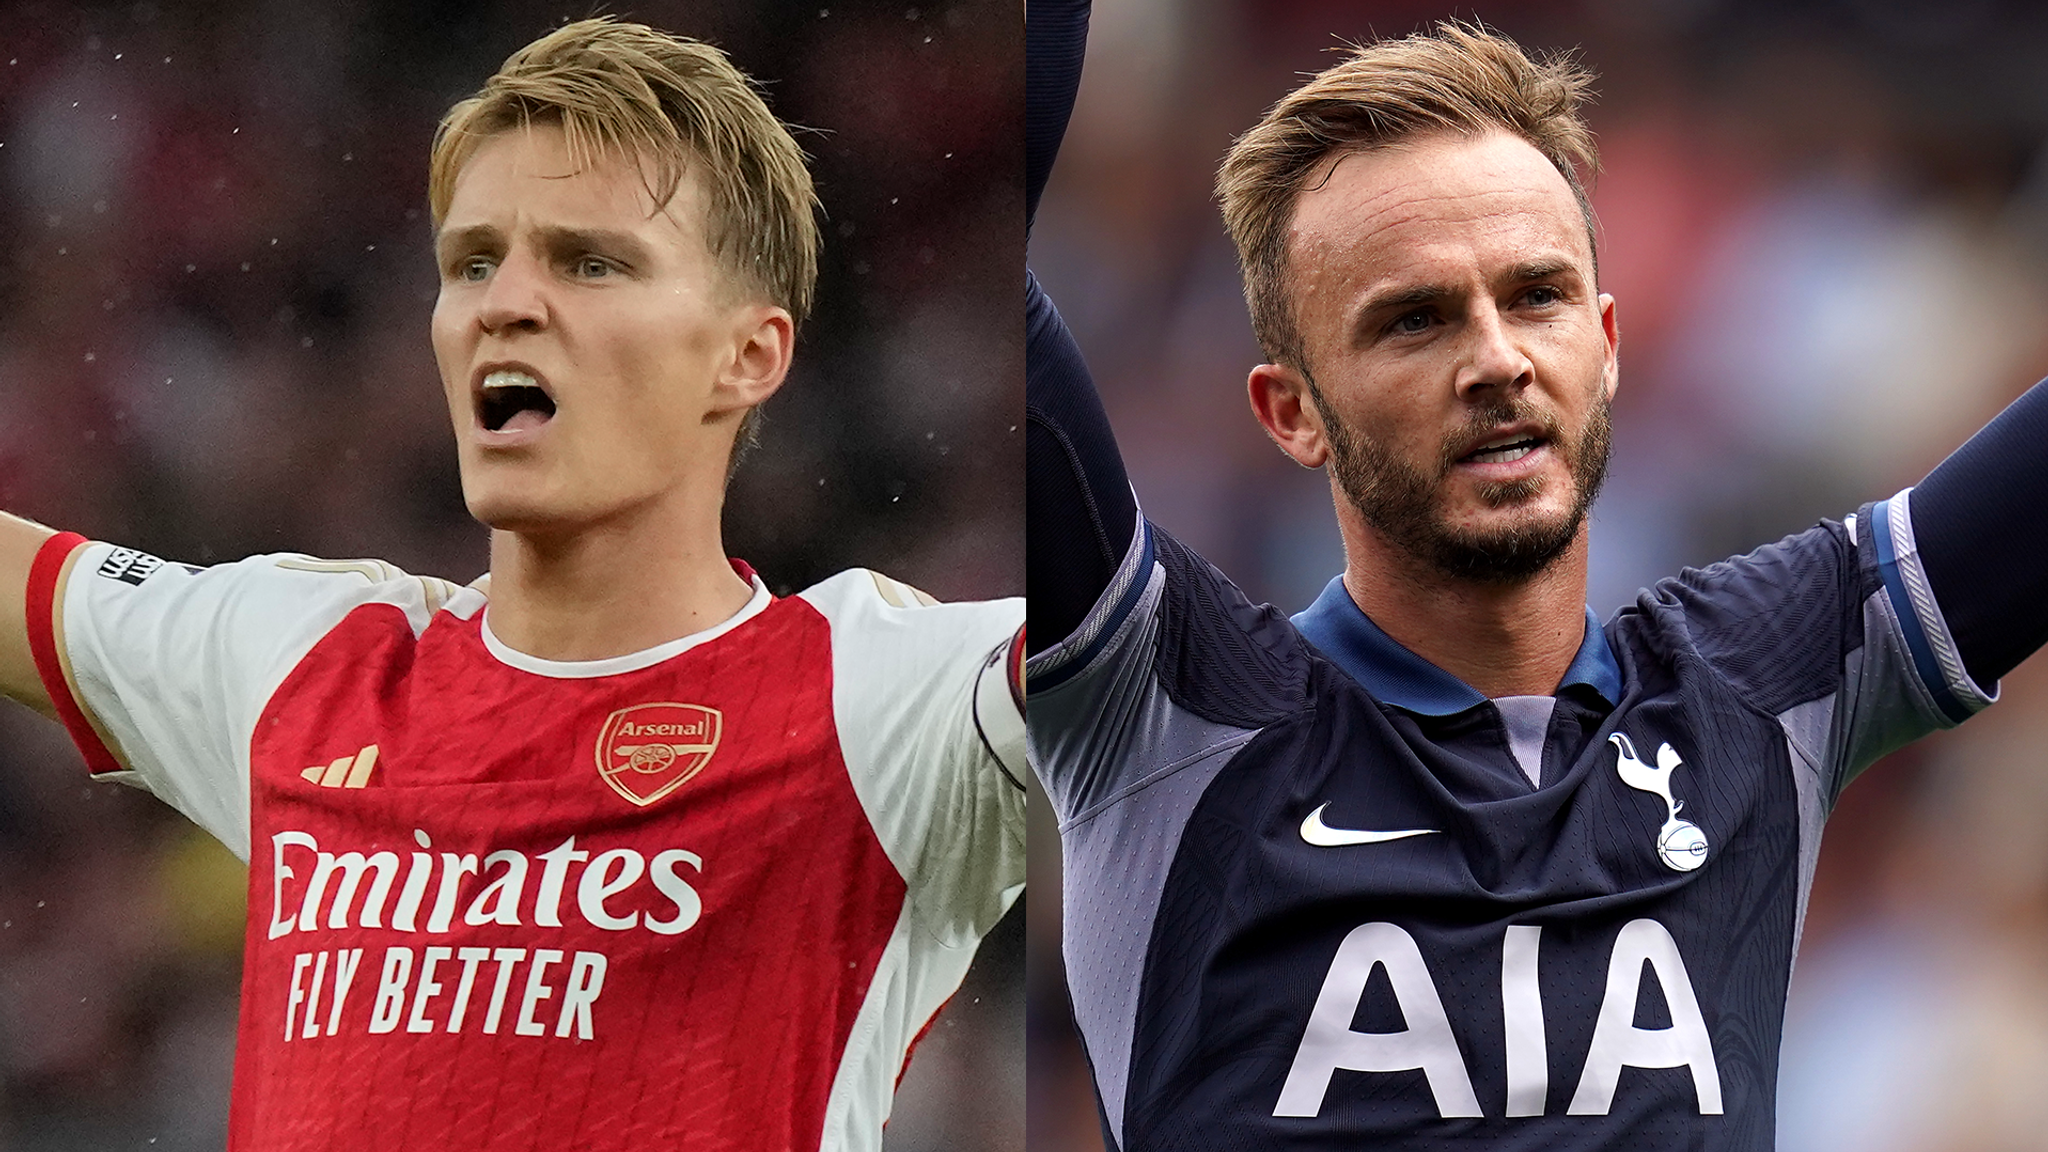 Arsenal vs Tottenham The stats and styles behind the rivals impressive Premier League starts Football News Sky Sports